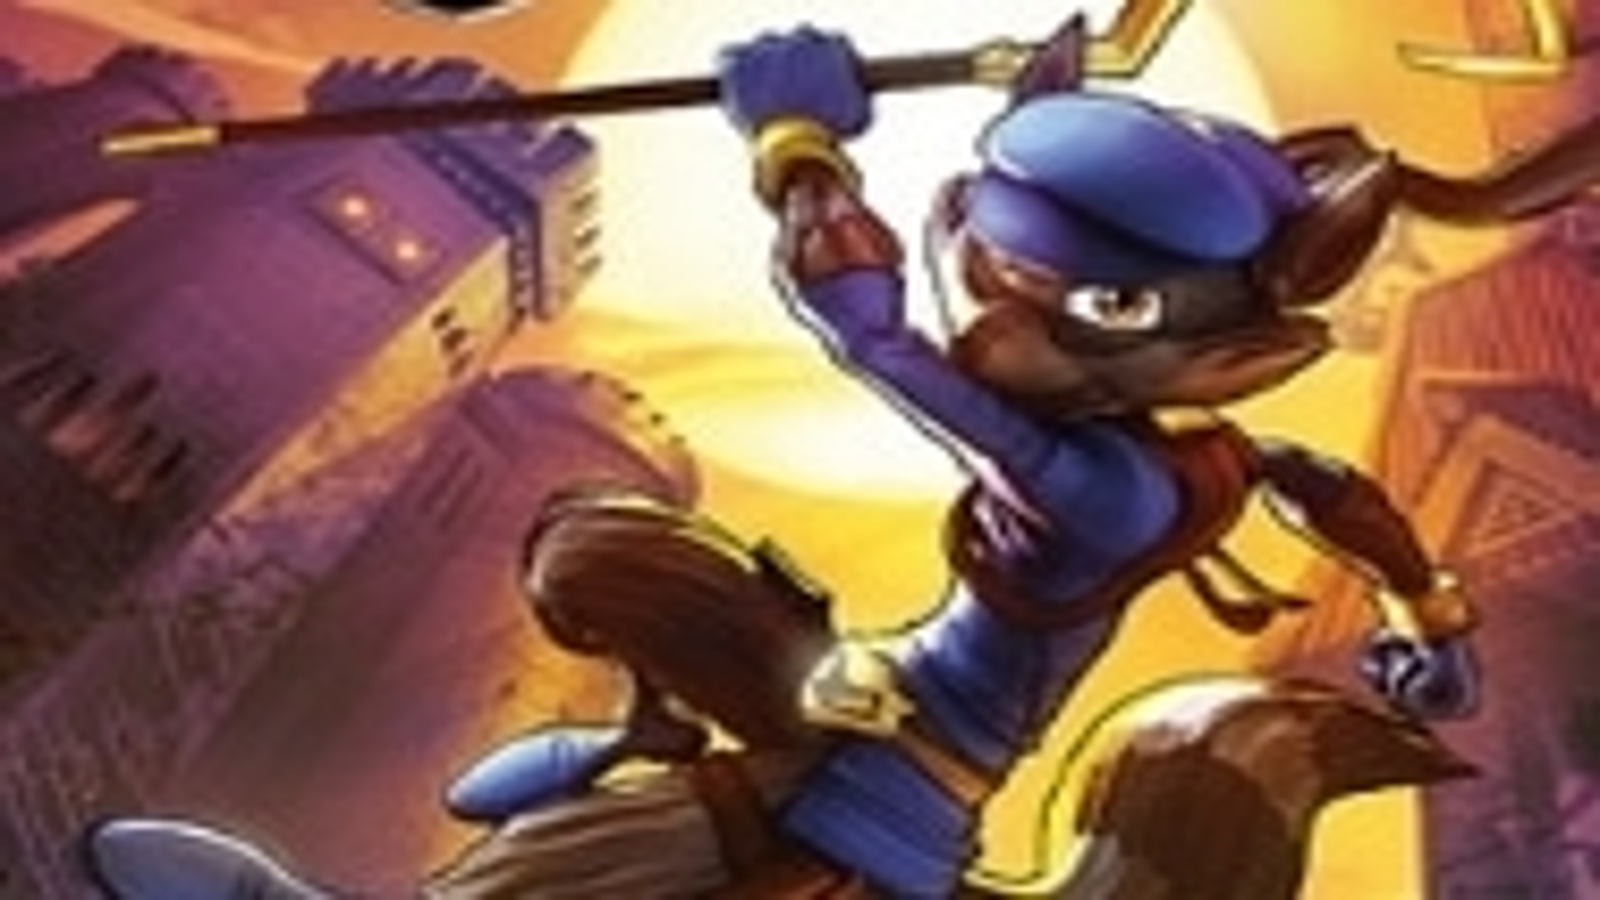 Sucker Punch Has No Plans For Infamous And Sly Cooper Games